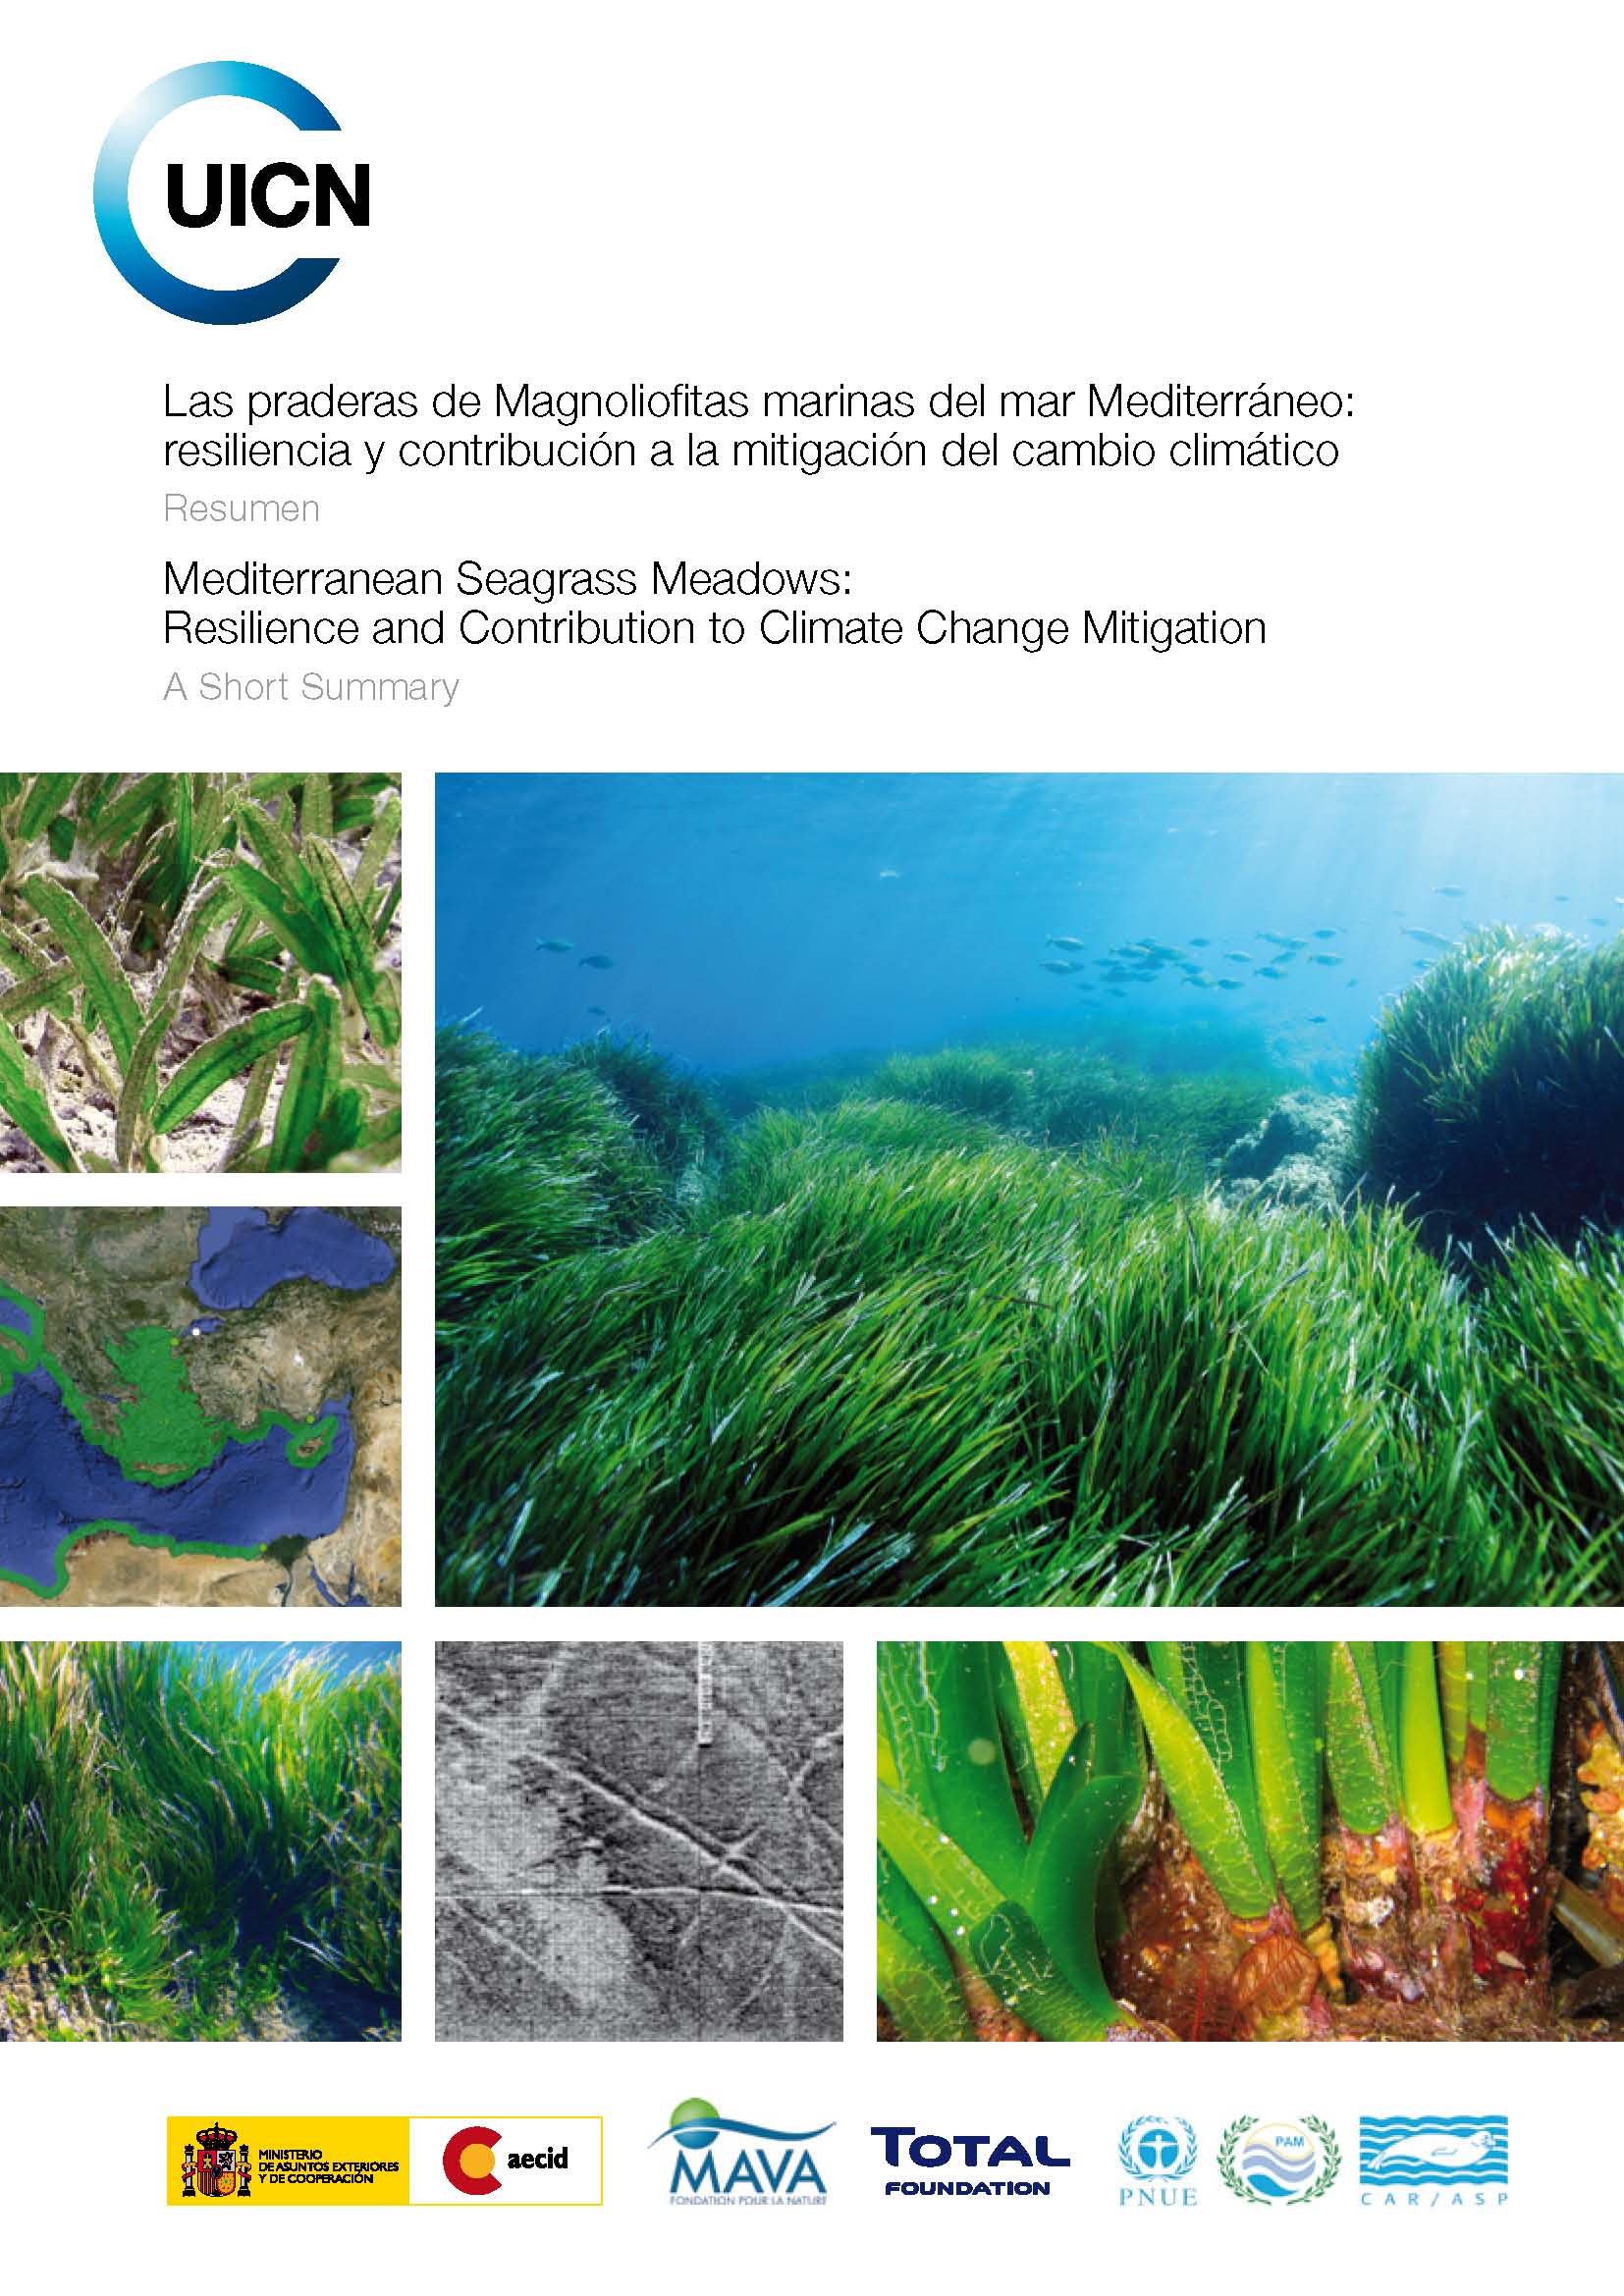 Mediterranean Seagrass Meadows : Resilience and Contribution to Climate Change Mitigation. A Short Summary.